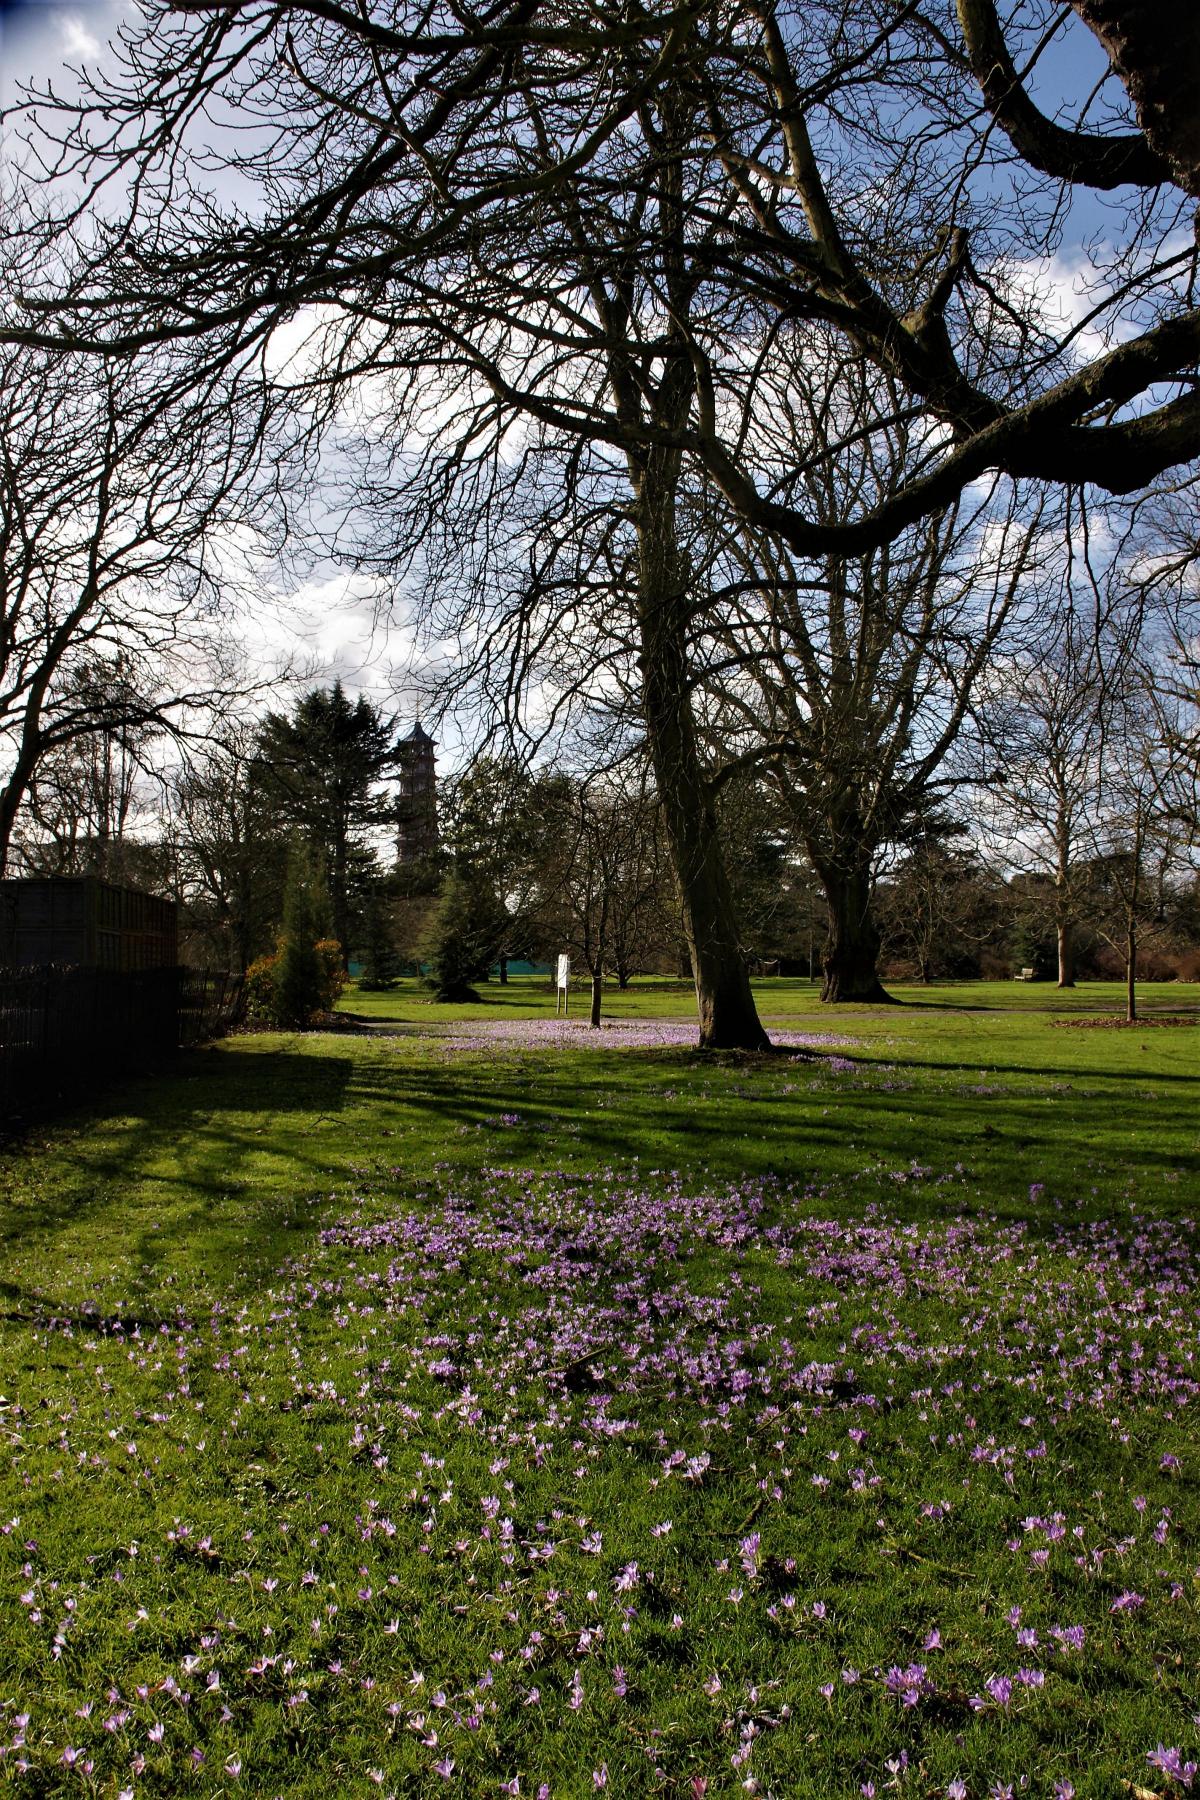 David Chare sent int this photo of Spring in Kew Gardens